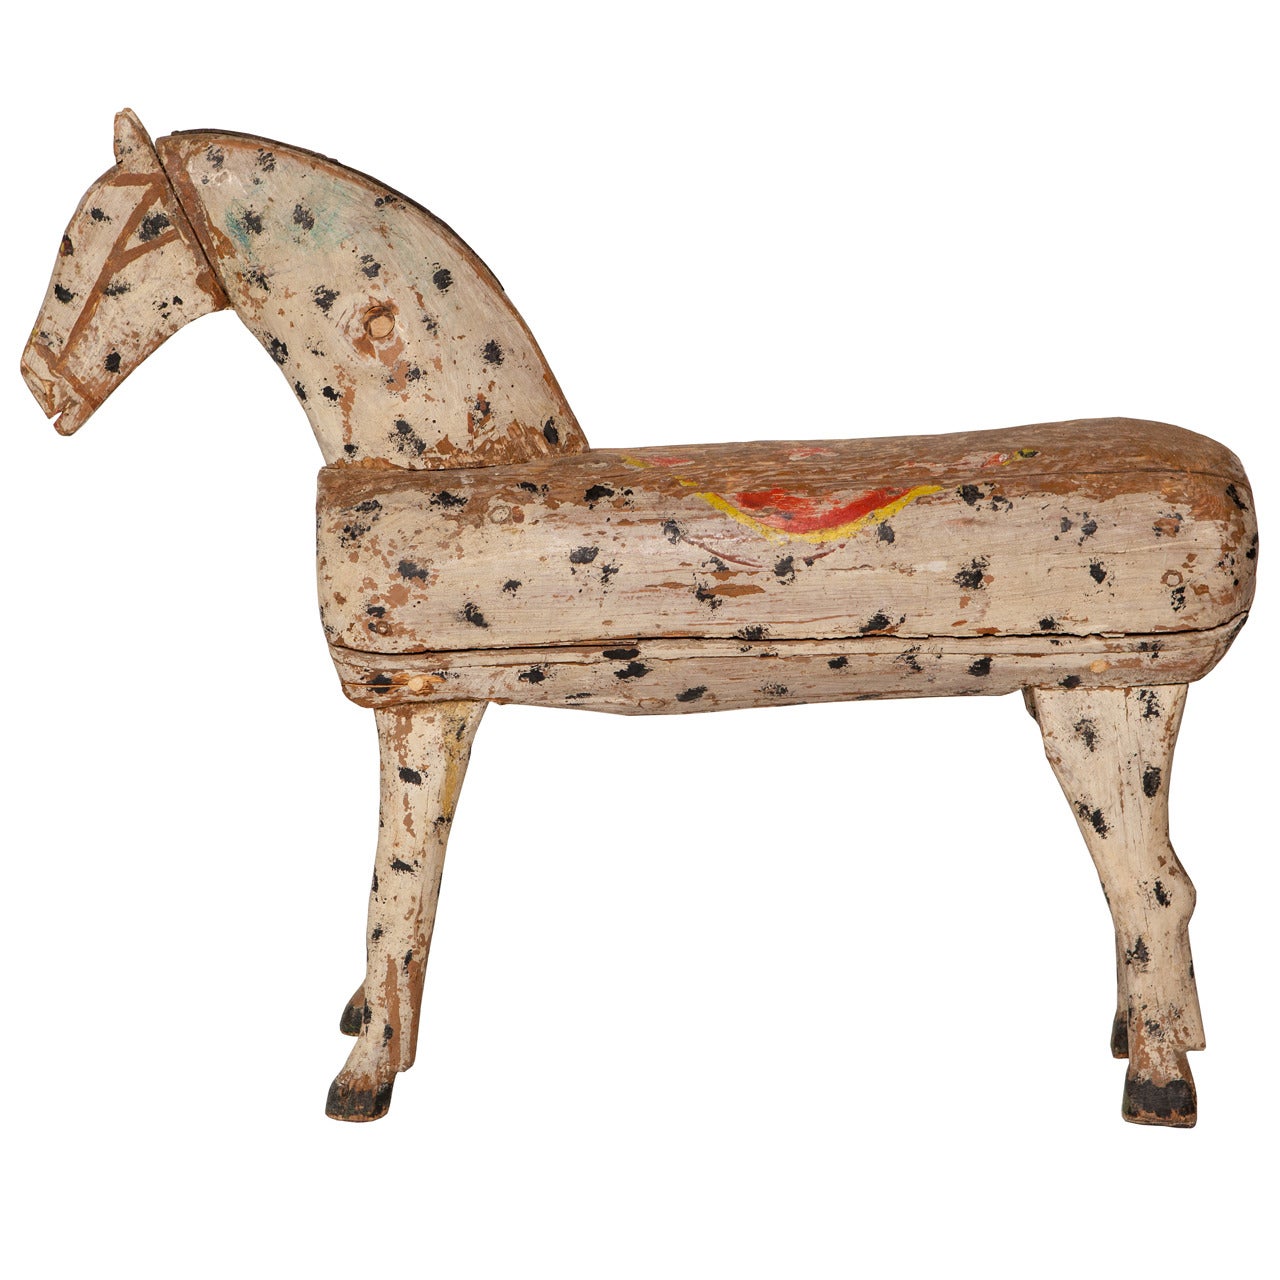 19th Century Swedish Painted Wooden Horse